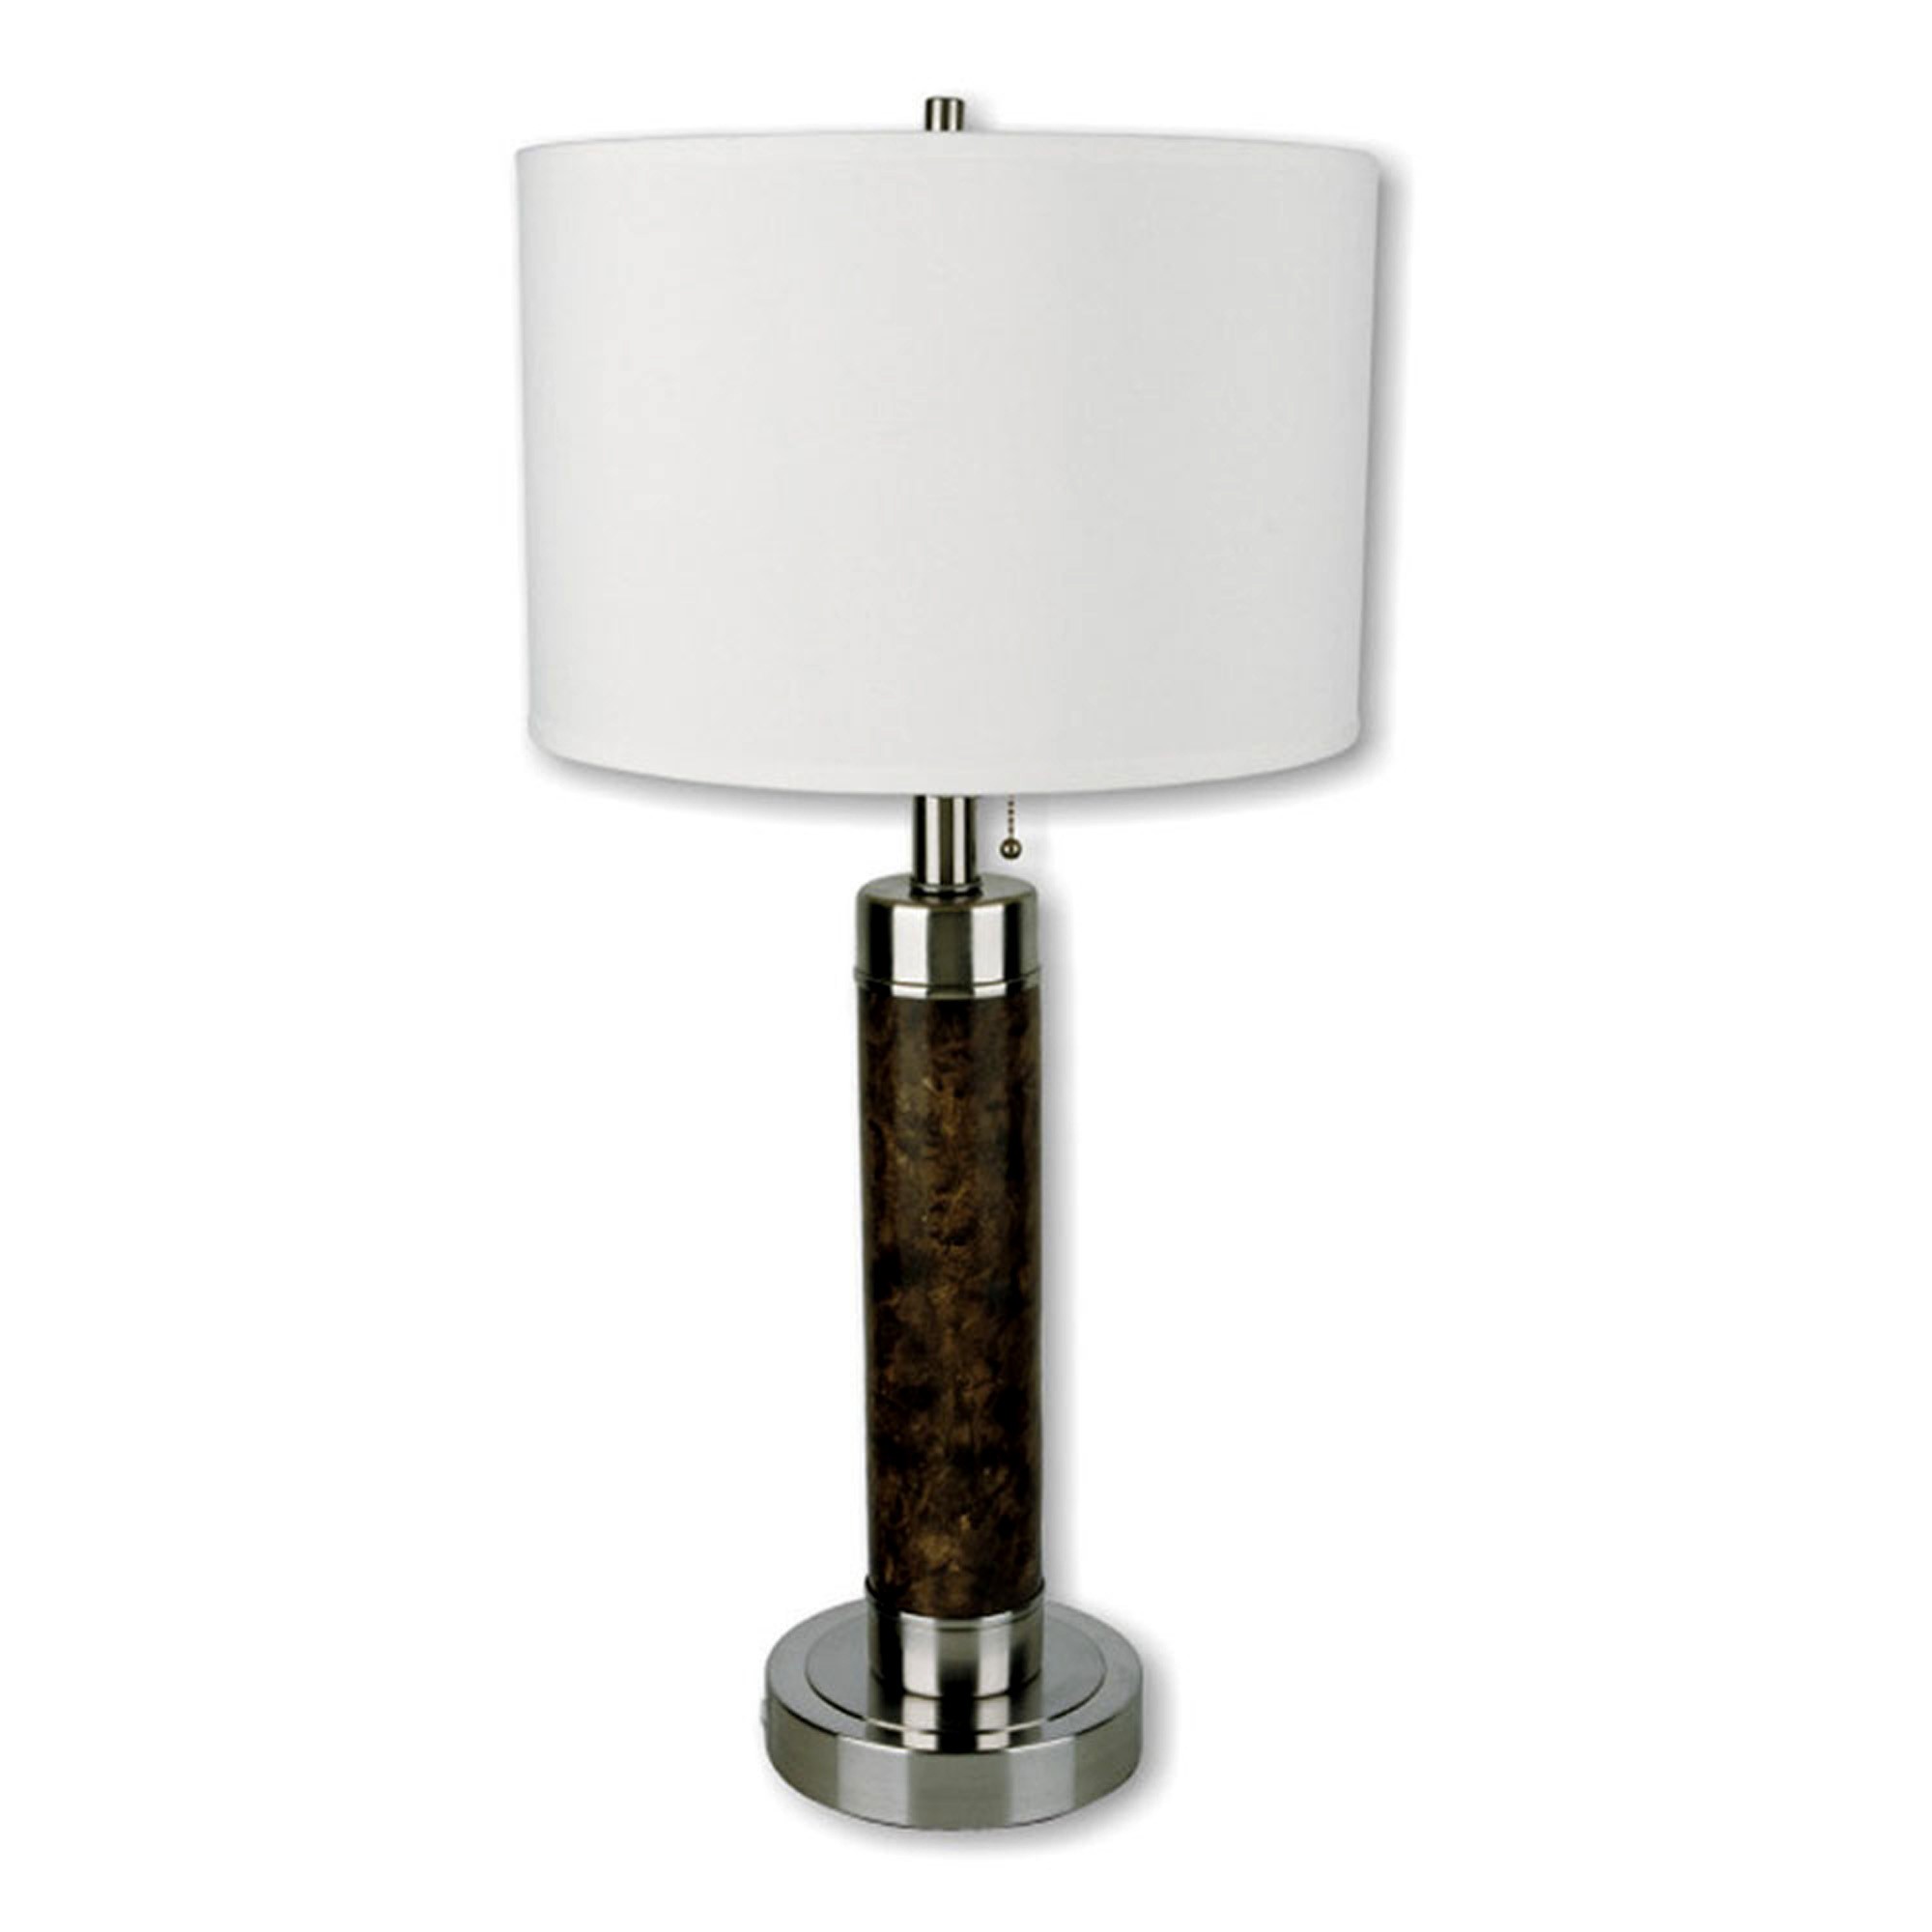 Silver Metal and Wooden Table Lamp